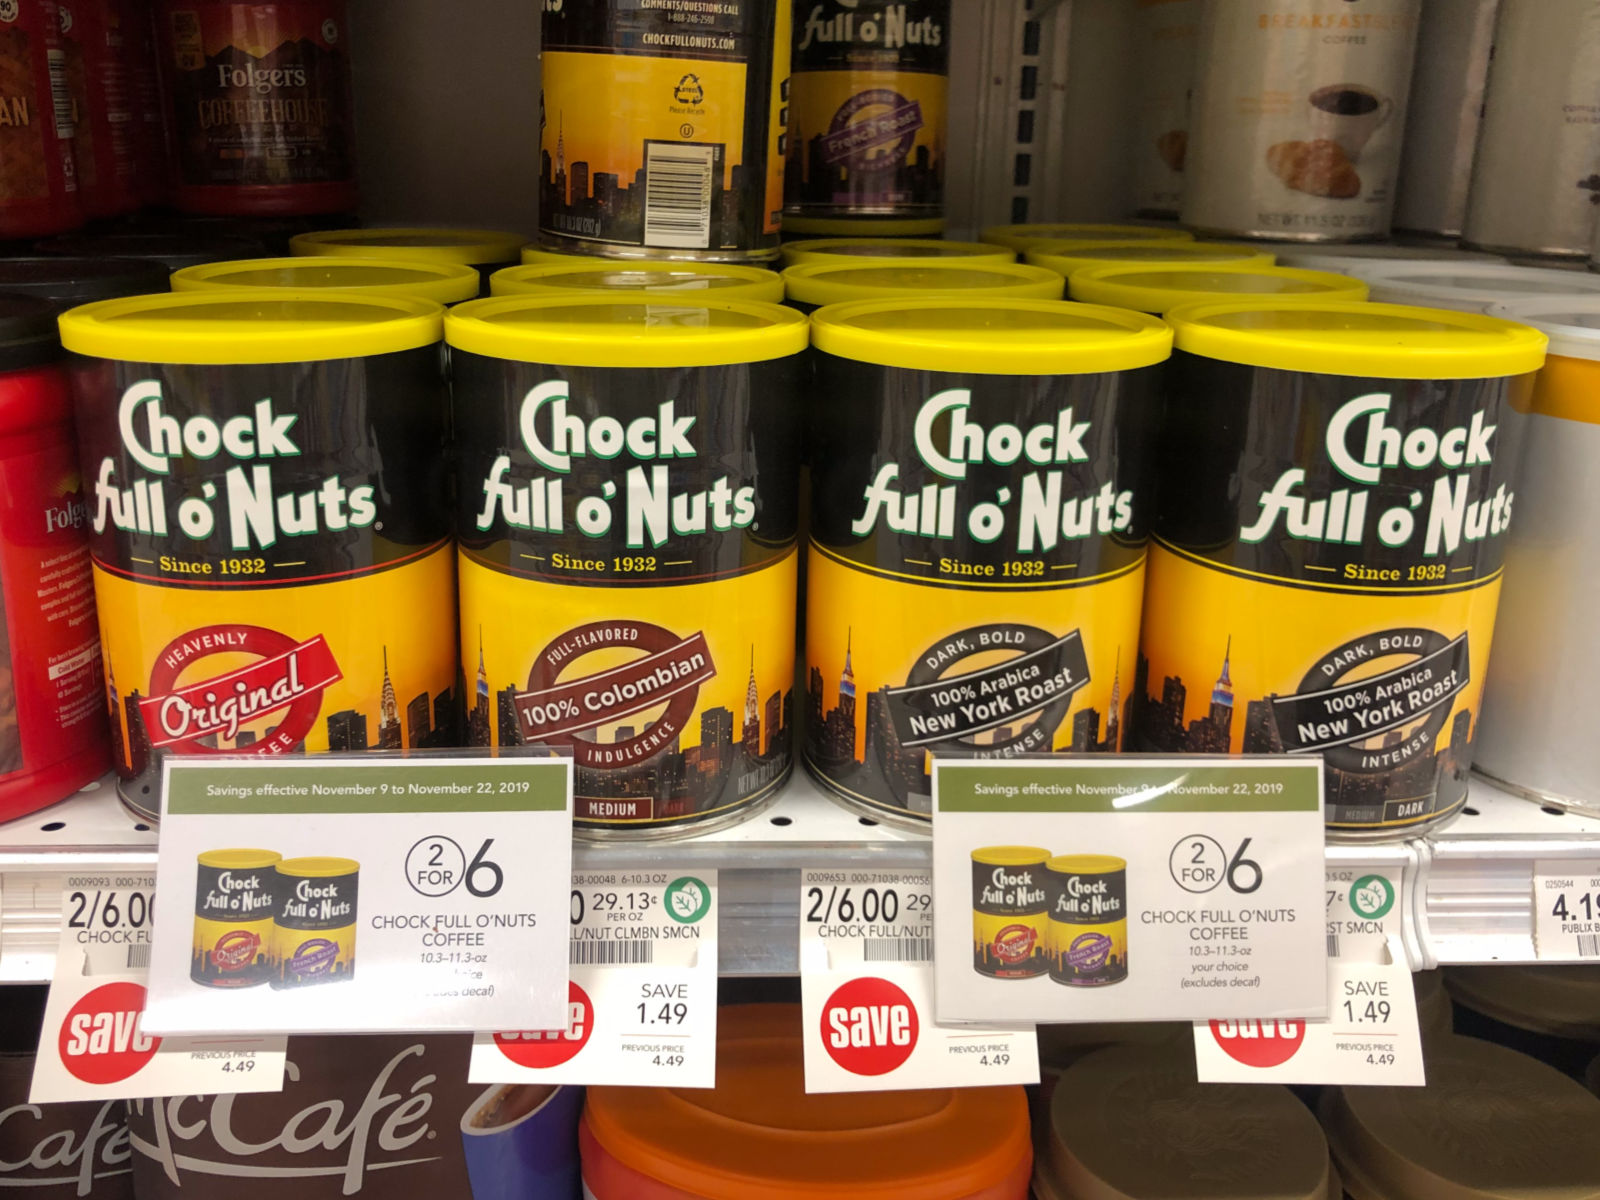 Save Big On Chock full o’Nuts® At Publix - $2 Coupon Valid Through 12/31 on I Heart Publix